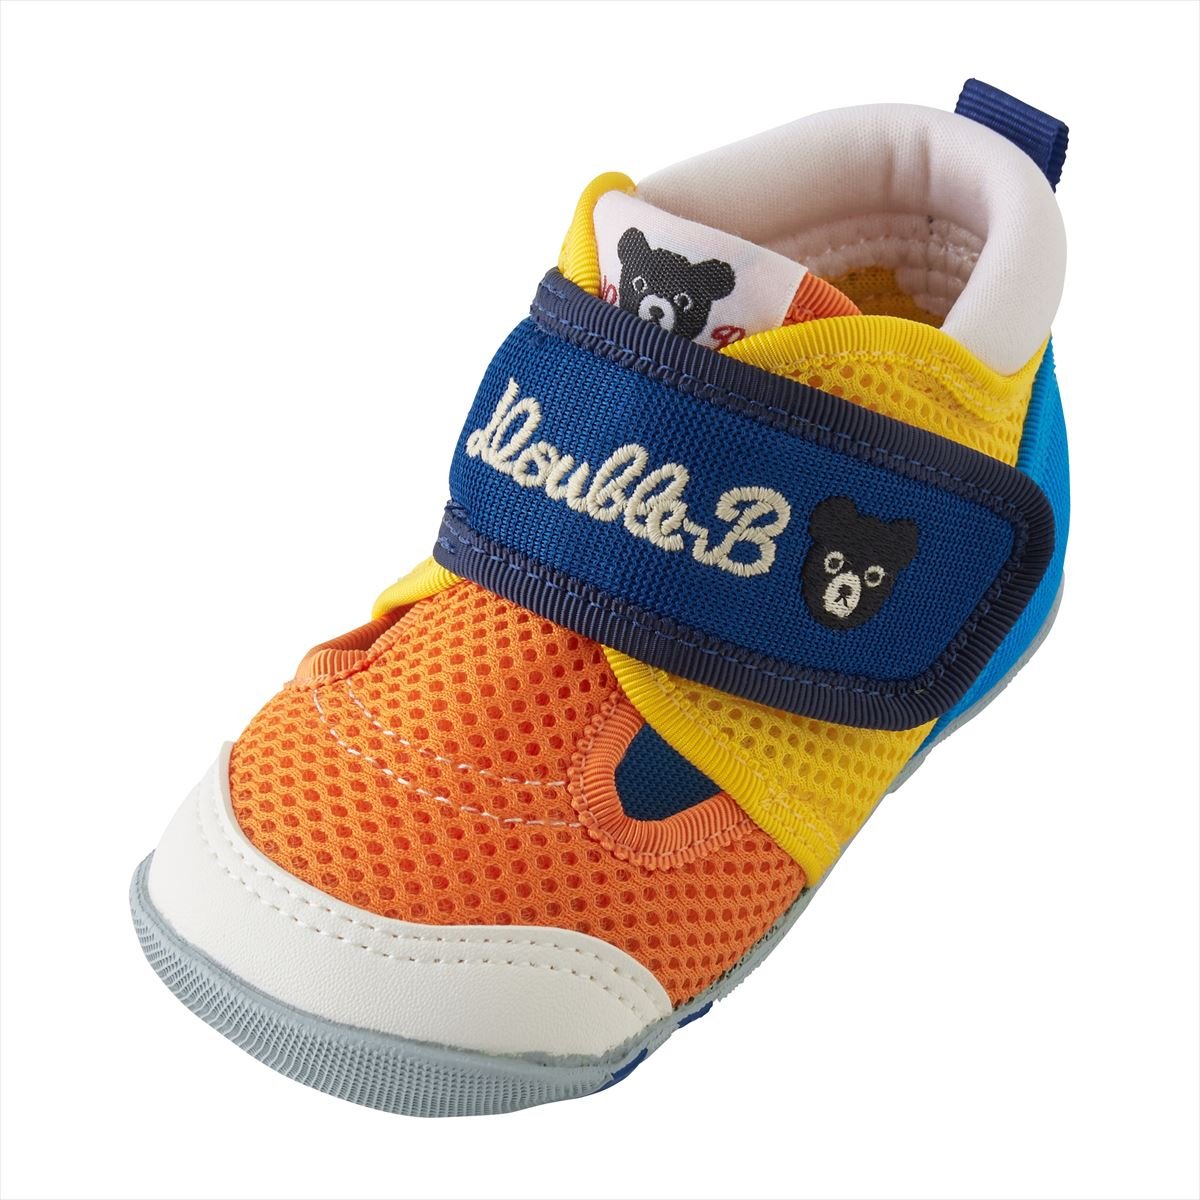 Double Russell Mesh First Shoes - B for Bold - 62-9302-572-87-11H